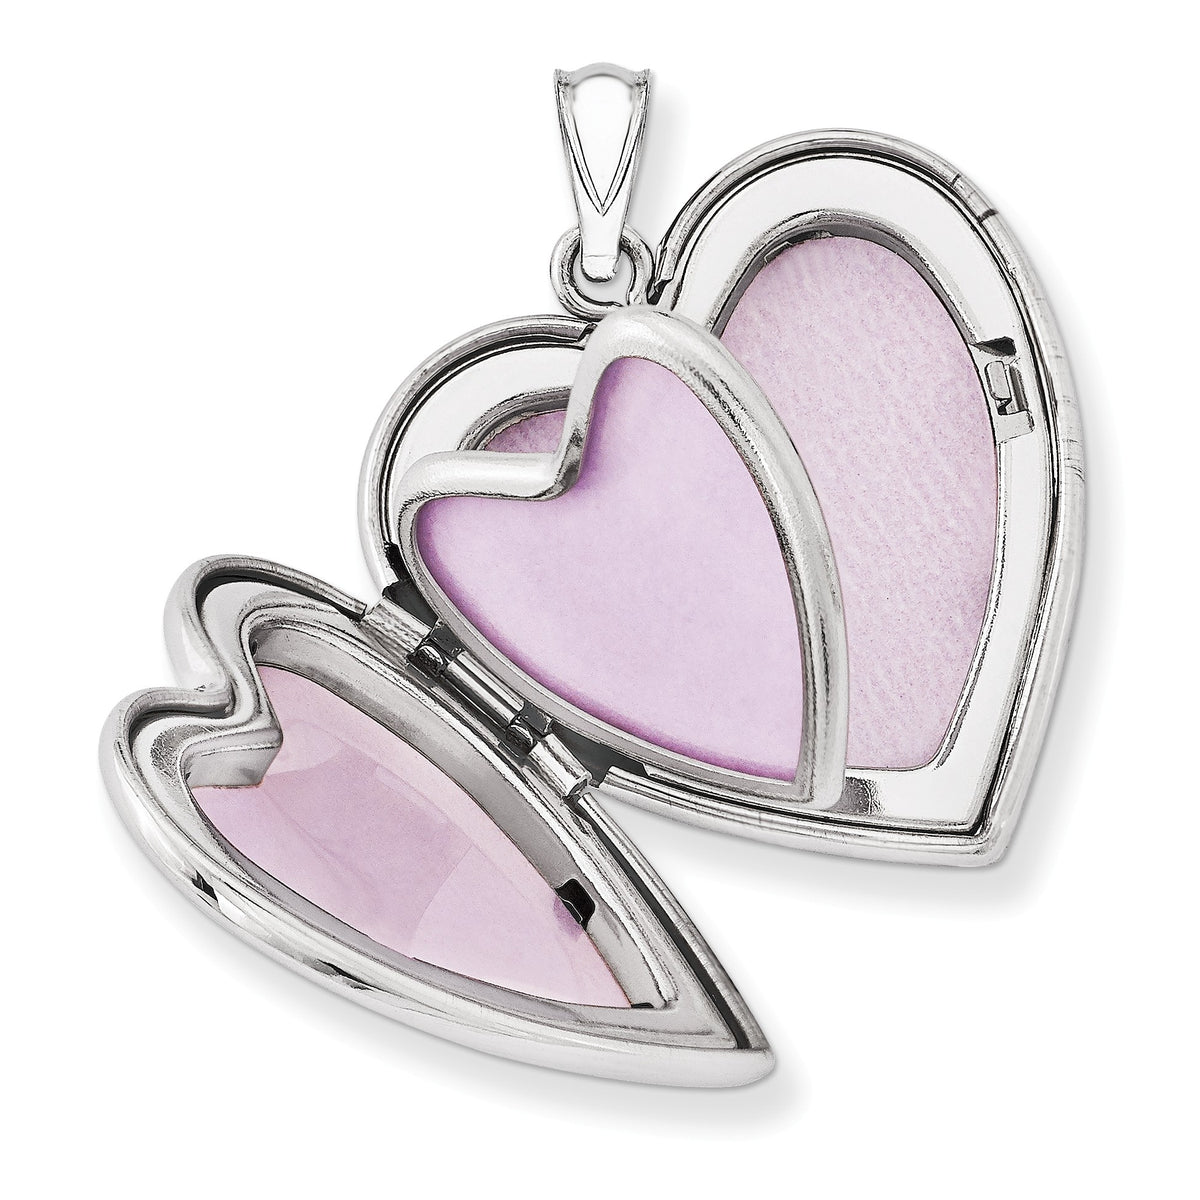 Alternate view of the Sterling Silver 24mm Scrolled Heart Family Locket by The Black Bow Jewelry Co.